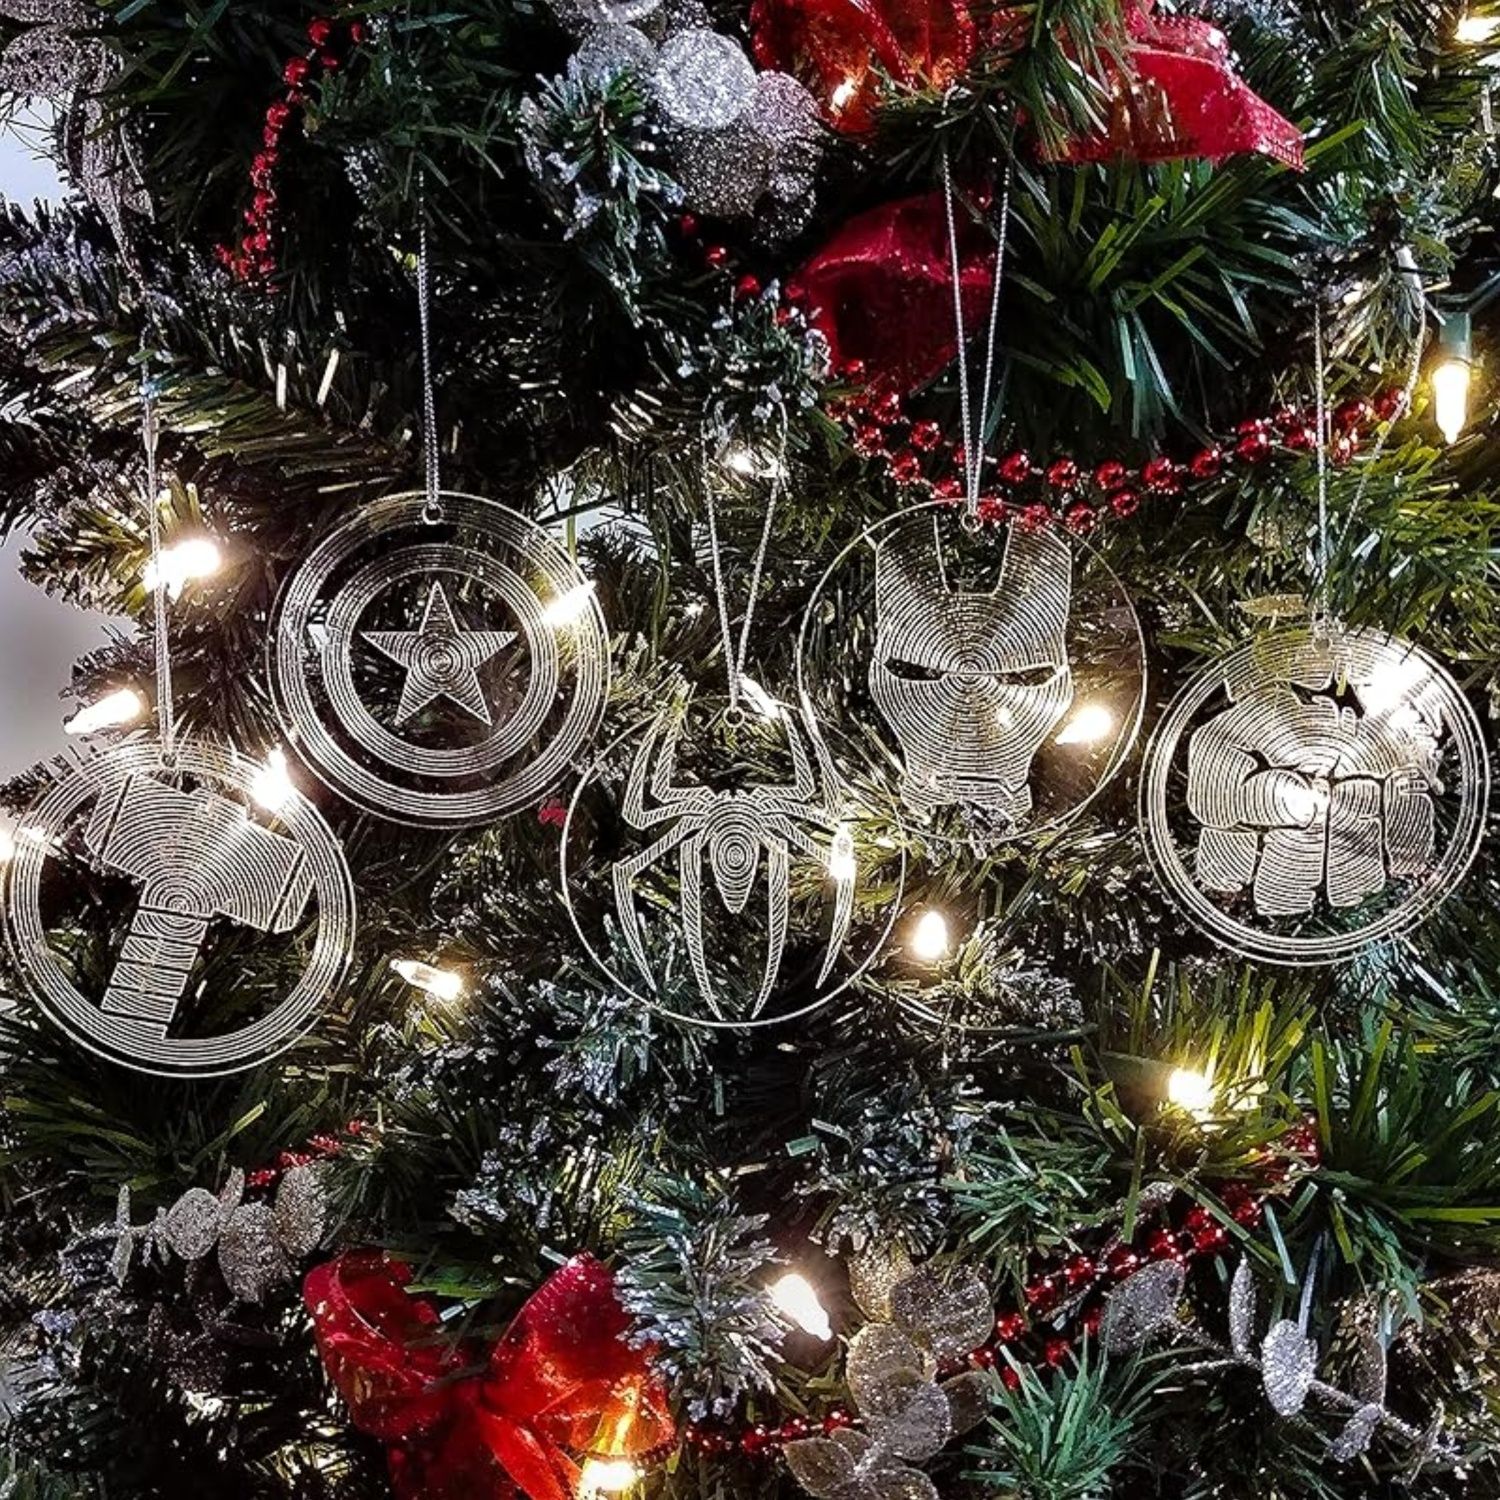 This image features five clear ornaments with the Avengers' symbols lasered on them.